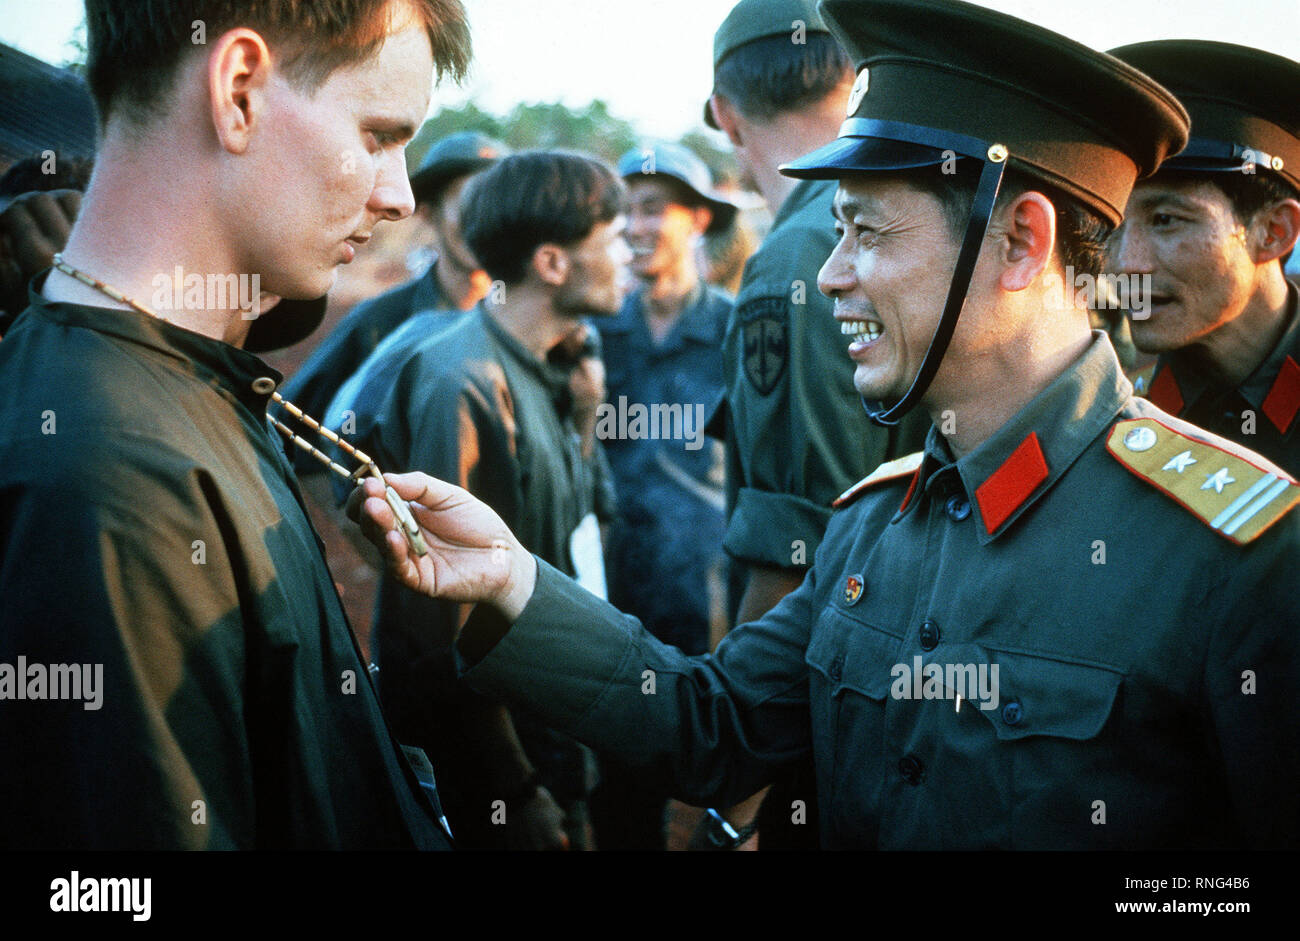 SPC-4 Richard Springman, U.S. Army, Captured 25 May 70) talks with a North Vietnamese Army officer who is looking at his peace symbol.  He is one of the twenty eight American POWs who were released by the Viet Cong on Feruary 12, 1973. Stock Photo